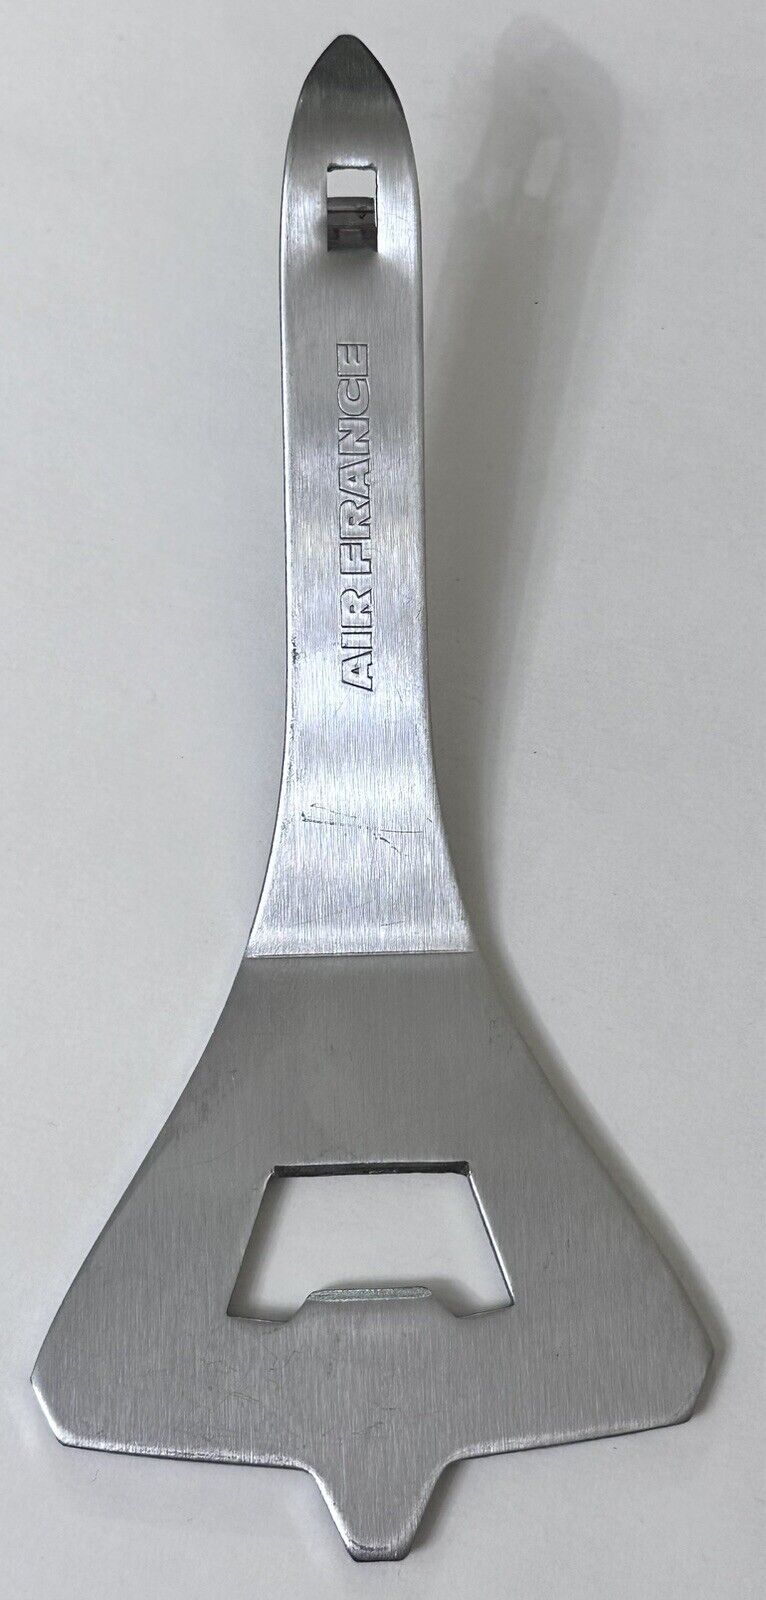 Rare Air France Concorde Airplane Supersonic Jet Stainless Steel Bottle Opener